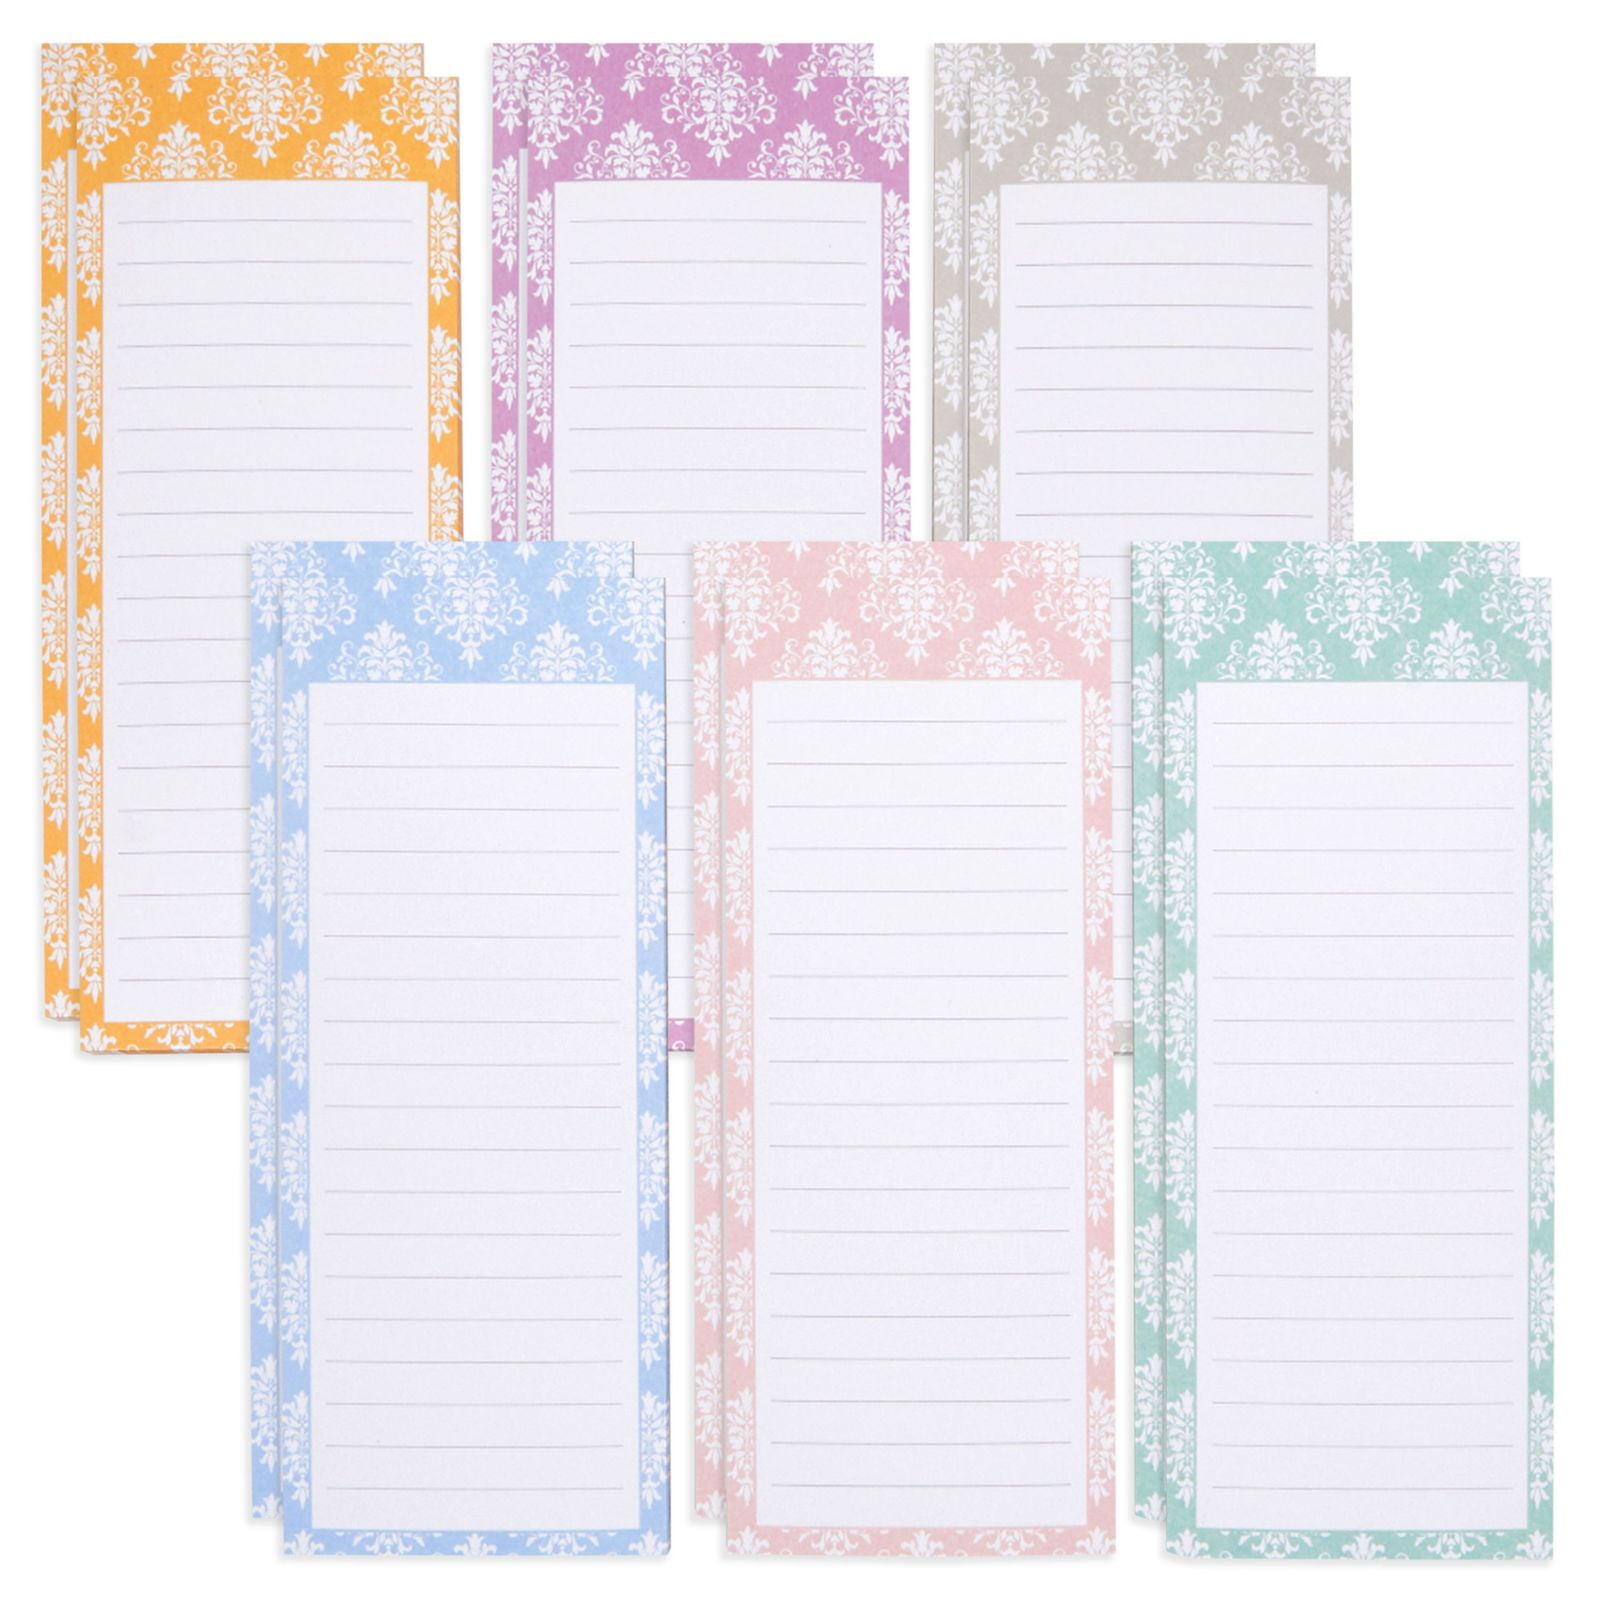 Magnetic Memo Pad & Pencil Fridge Magnet Notes Board Travel Look Shopping List 